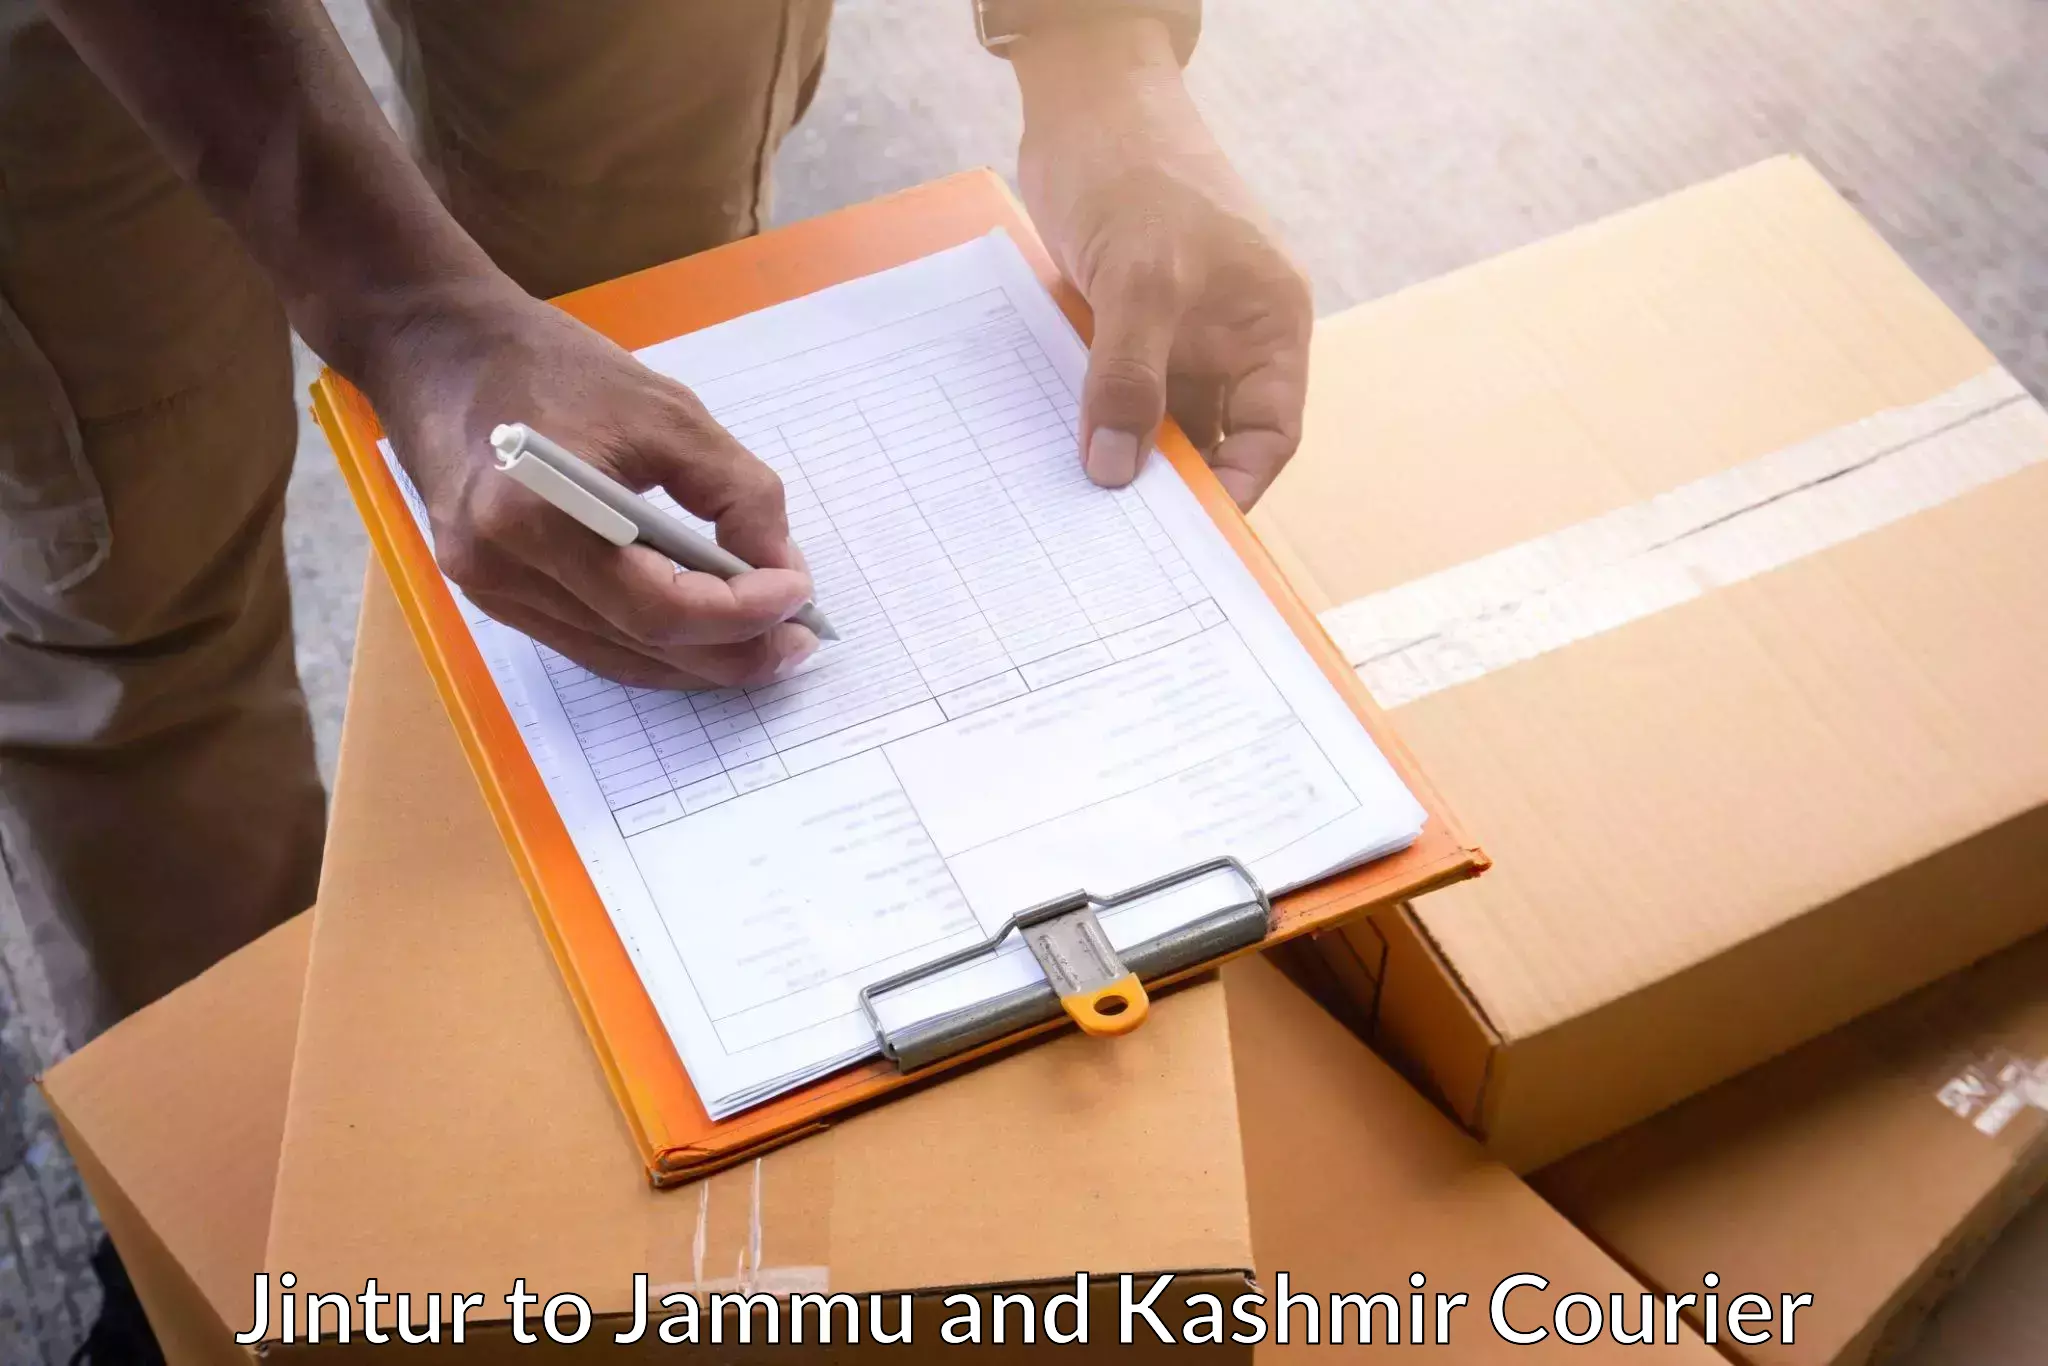 Next-day delivery options Jintur to Baramulla